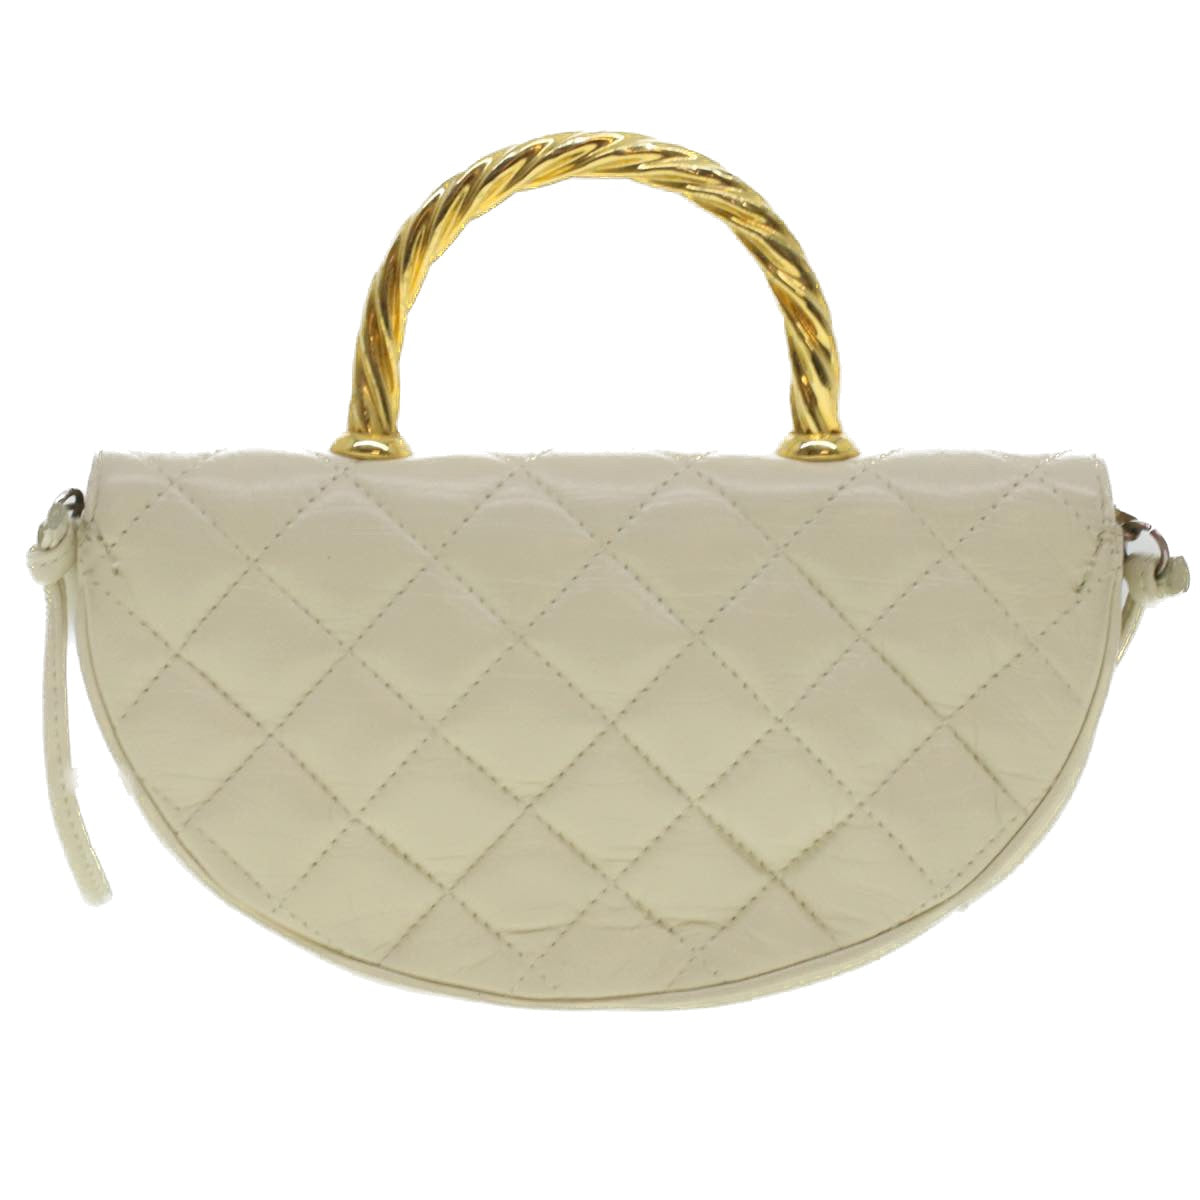 GIVENCHY Matelasse Hand Bag Leather 2way White Gold Auth 37405 - 0